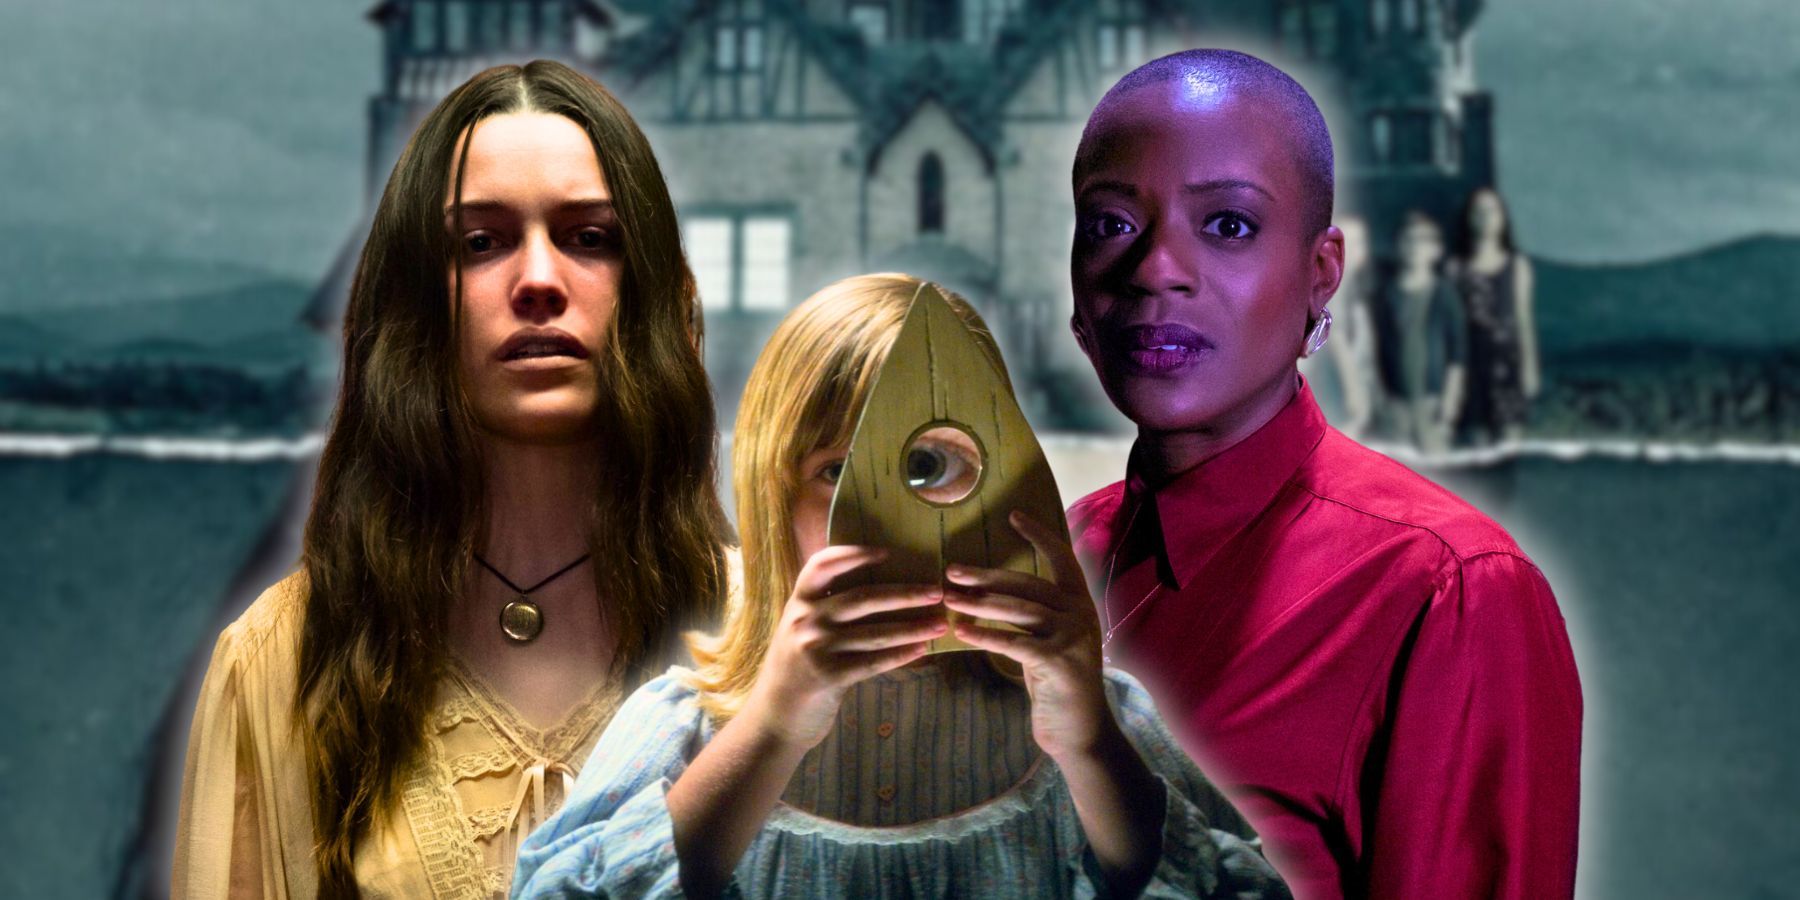 Mike Flanagan's Netflix horror shows, ranked